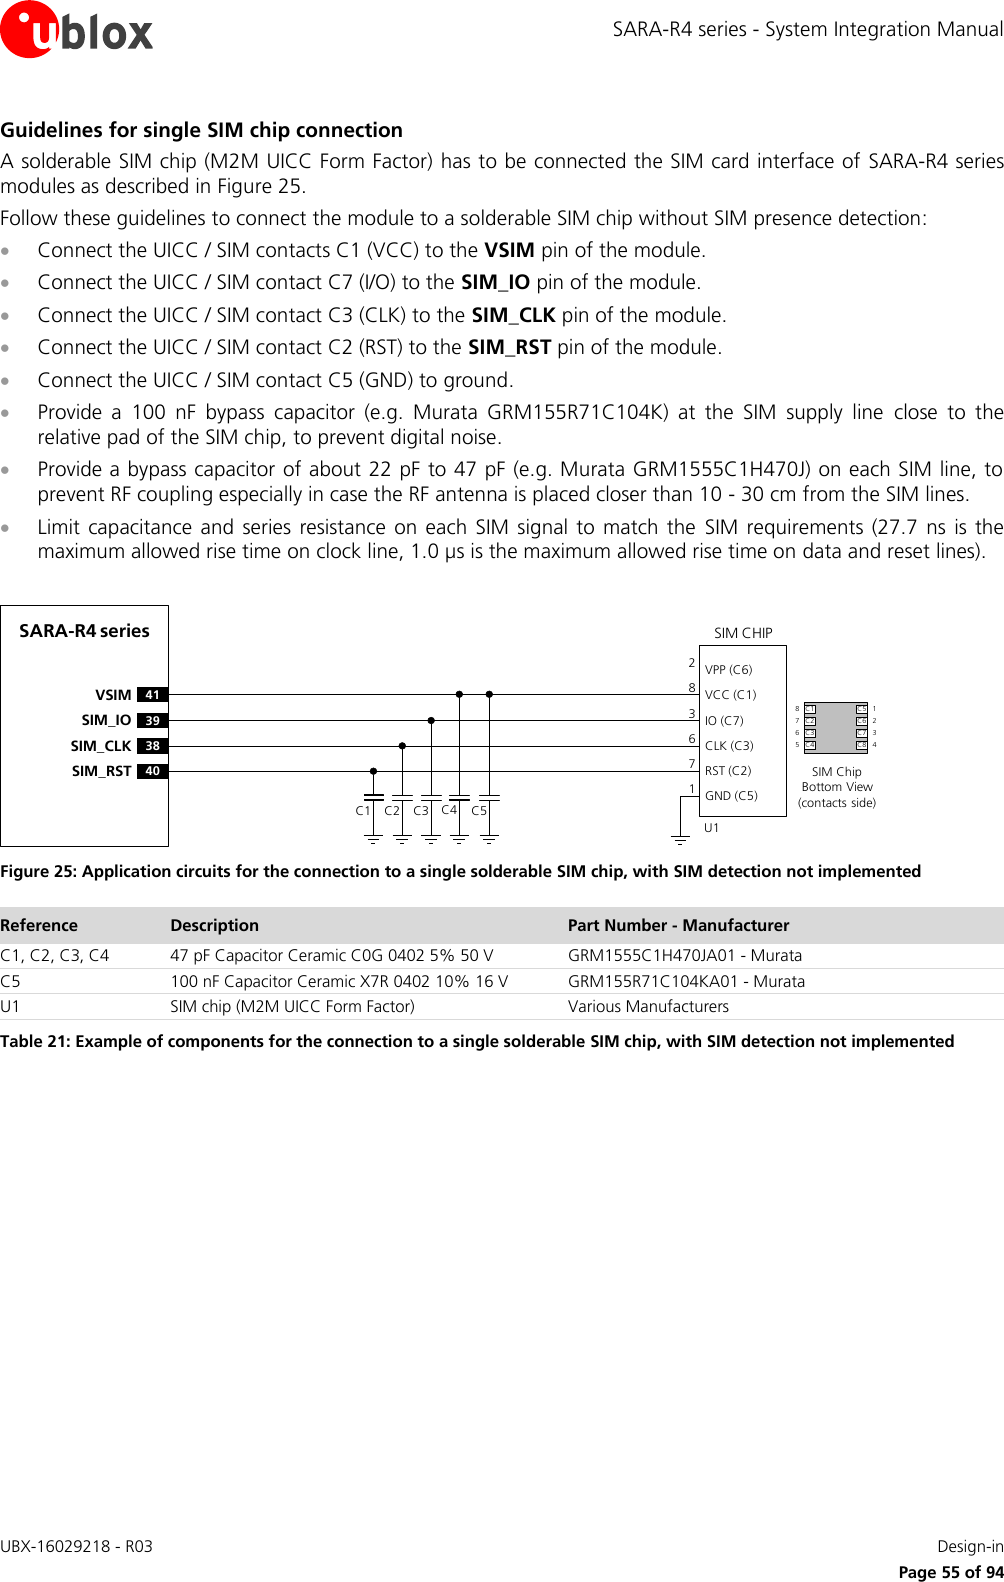 SARA-R4 series - System Integration Manual UBX-16029218 - R03    Design-in     Page 55 of 94 Guidelines for single SIM chip connection A solderable SIM chip (M2M UICC Form Factor) has to be connected the SIM card interface of  SARA-R4 series modules as described in Figure 25. Follow these guidelines to connect the module to a solderable SIM chip without SIM presence detection:  Connect the UICC / SIM contacts C1 (VCC) to the VSIM pin of the module.  Connect the UICC / SIM contact C7 (I/O) to the SIM_IO pin of the module.  Connect the UICC / SIM contact C3 (CLK) to the SIM_CLK pin of the module.  Connect the UICC / SIM contact C2 (RST) to the SIM_RST pin of the module.  Connect the UICC / SIM contact C5 (GND) to ground.  Provide  a  100  nF  bypass  capacitor  (e.g.  Murata  GRM155R71C104K)  at  the  SIM  supply  line  close  to  the relative pad of the SIM chip, to prevent digital noise.   Provide a bypass capacitor of about 22 pF to 47 pF (e.g. Murata GRM1555C1H470J) on each SIM line, to prevent RF coupling especially in case the RF antenna is placed closer than 10 - 30 cm from the SIM lines.  Limit capacitance  and  series resistance  on each  SIM  signal to  match the  SIM  requirements  (27.7  ns  is  the maximum allowed rise time on clock line, 1.0 µs is the maximum allowed rise time on data and reset lines).  SARA-R4 series41VSIM39SIM_IO38SIM_CLK40SIM_RSTSIM CHIPSIM ChipBottom View (contacts side)C1VPP (C6)VCC (C1)IO (C7)CLK (C3)RST (C2)GND (C5)C2 C3 C5U1C4283671C1 C5C2 C6C3 C7C4 C887651234 Figure 25: Application circuits for the connection to a single solderable SIM chip, with SIM detection not implemented Reference Description Part Number - Manufacturer C1, C2, C3, C4 47 pF Capacitor Ceramic C0G 0402 5% 50 V GRM1555C1H470JA01 - Murata C5 100 nF Capacitor Ceramic X7R 0402 10% 16 V GRM155R71C104KA01 - Murata U1 SIM chip (M2M UICC Form Factor) Various Manufacturers Table 21: Example of components for the connection to a single solderable SIM chip, with SIM detection not implemented  